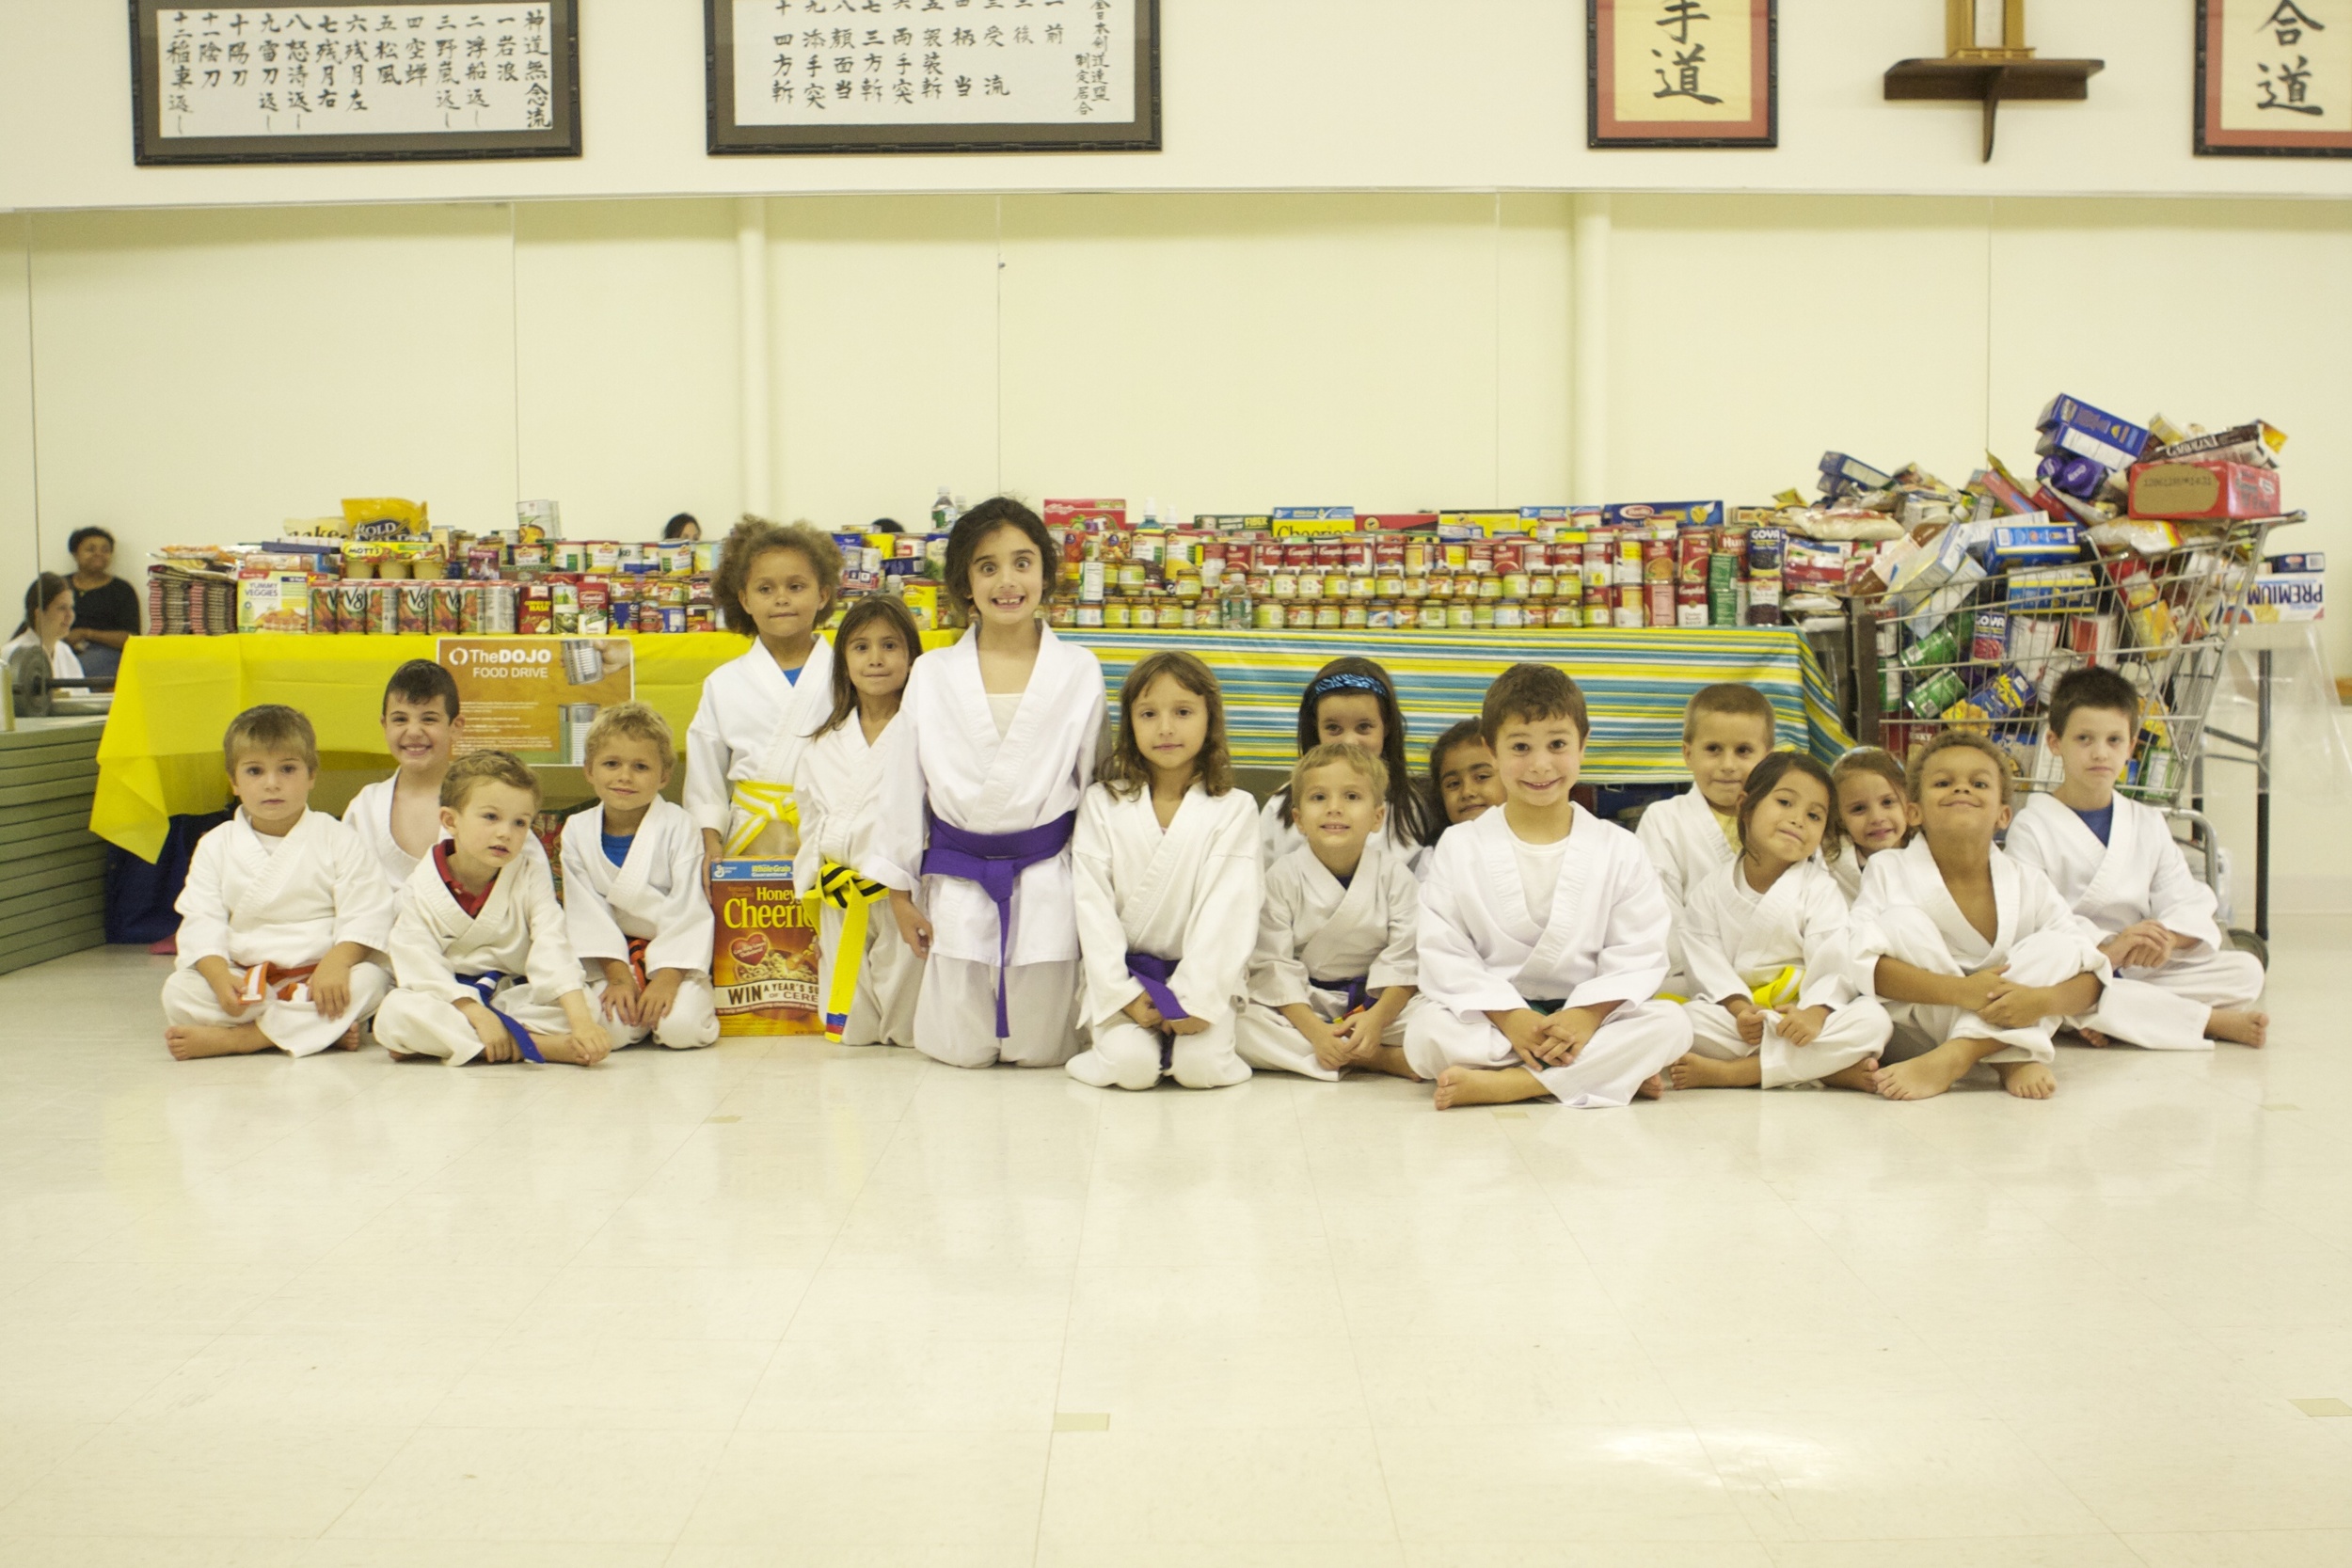 thedojo-food-drive-martial-arts-karate-kids-doing-community-service-in-rutherford-nj_14484461209_o.jpg